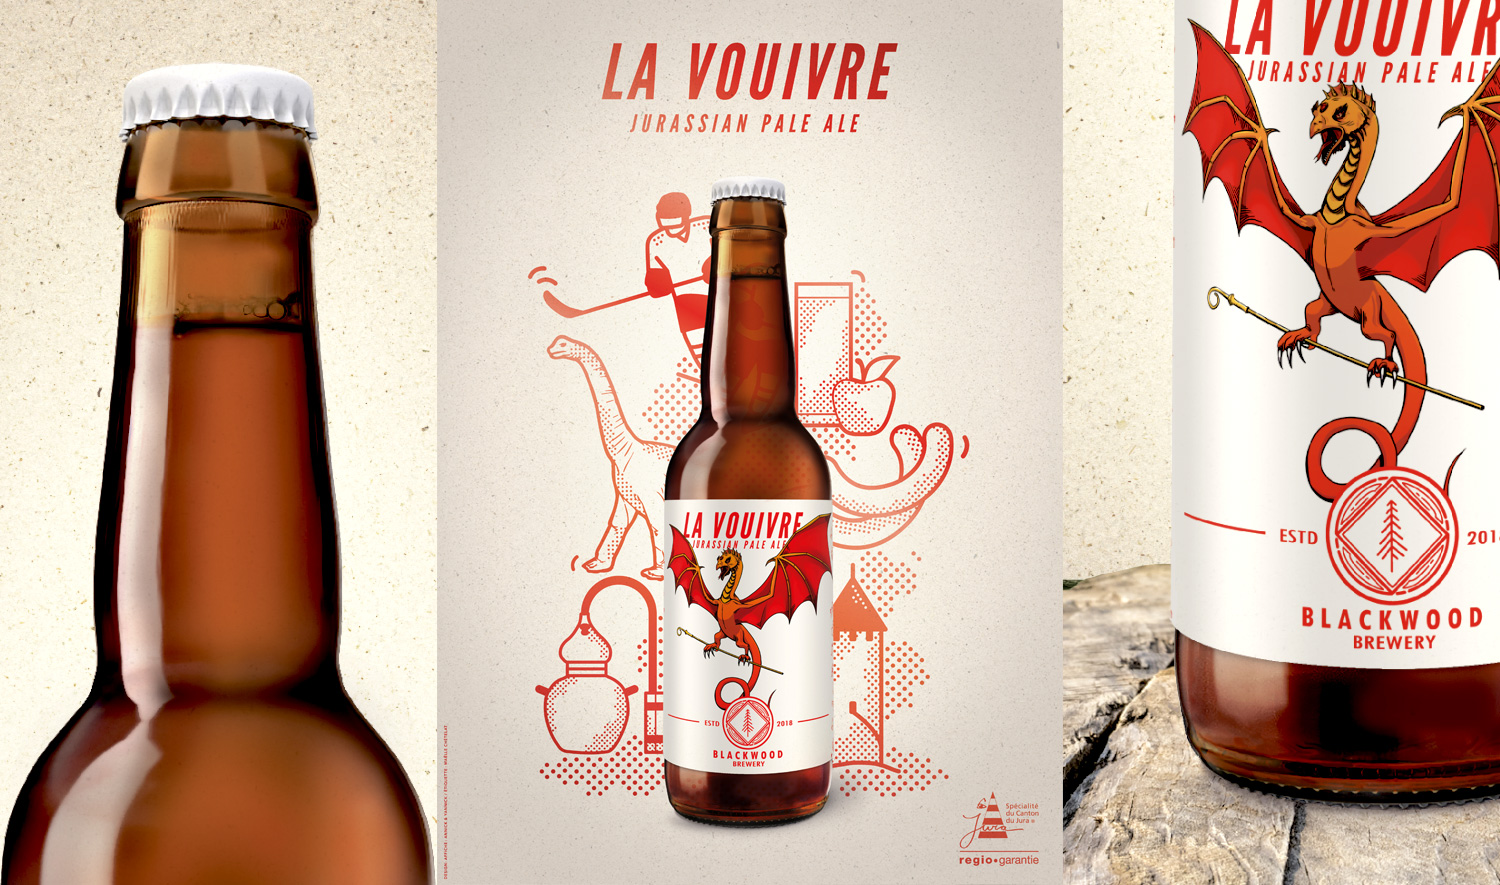 La Vouivre. Jurassian Pale Ale by Blackwood Brewery, Porrentruy, Jura. Product imaging and Poster Design by Annick & Yannick.